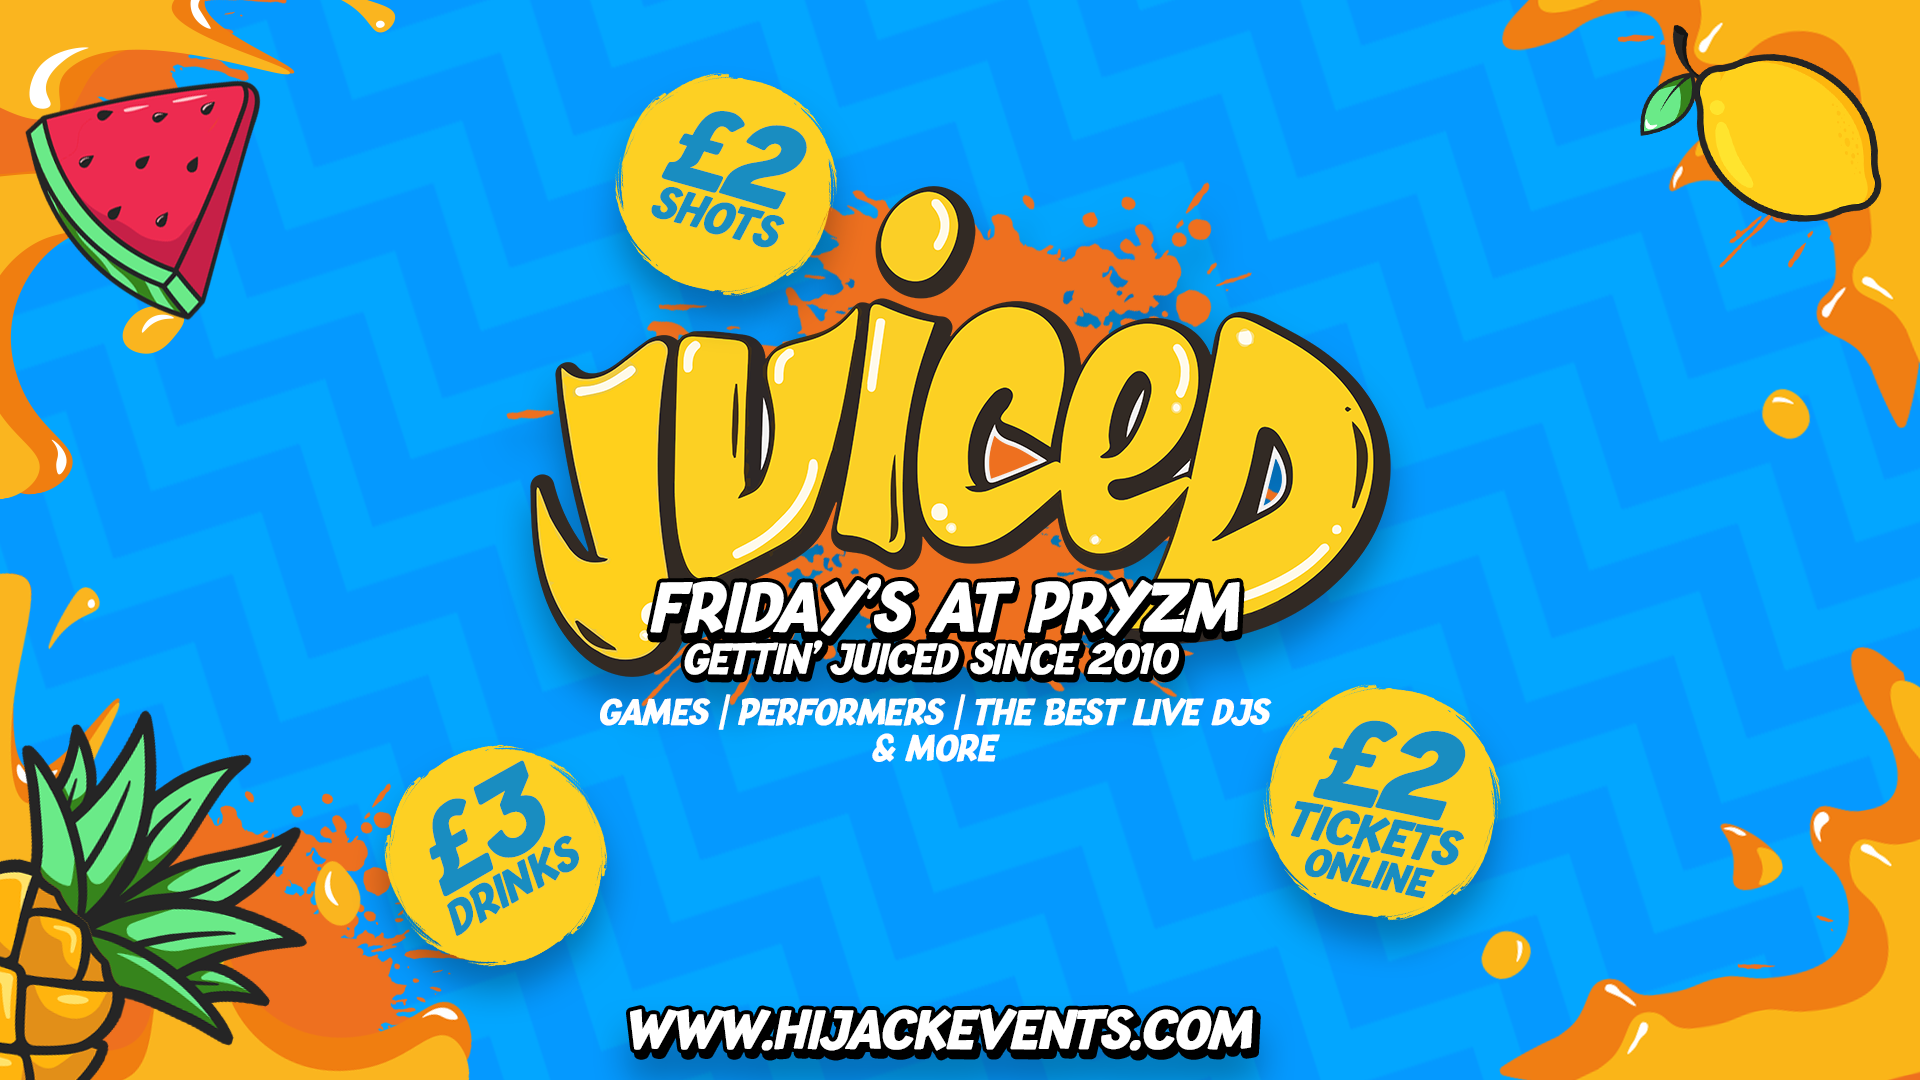 JUICED! Every Friday – BIGGEST PARTY NIGHT!